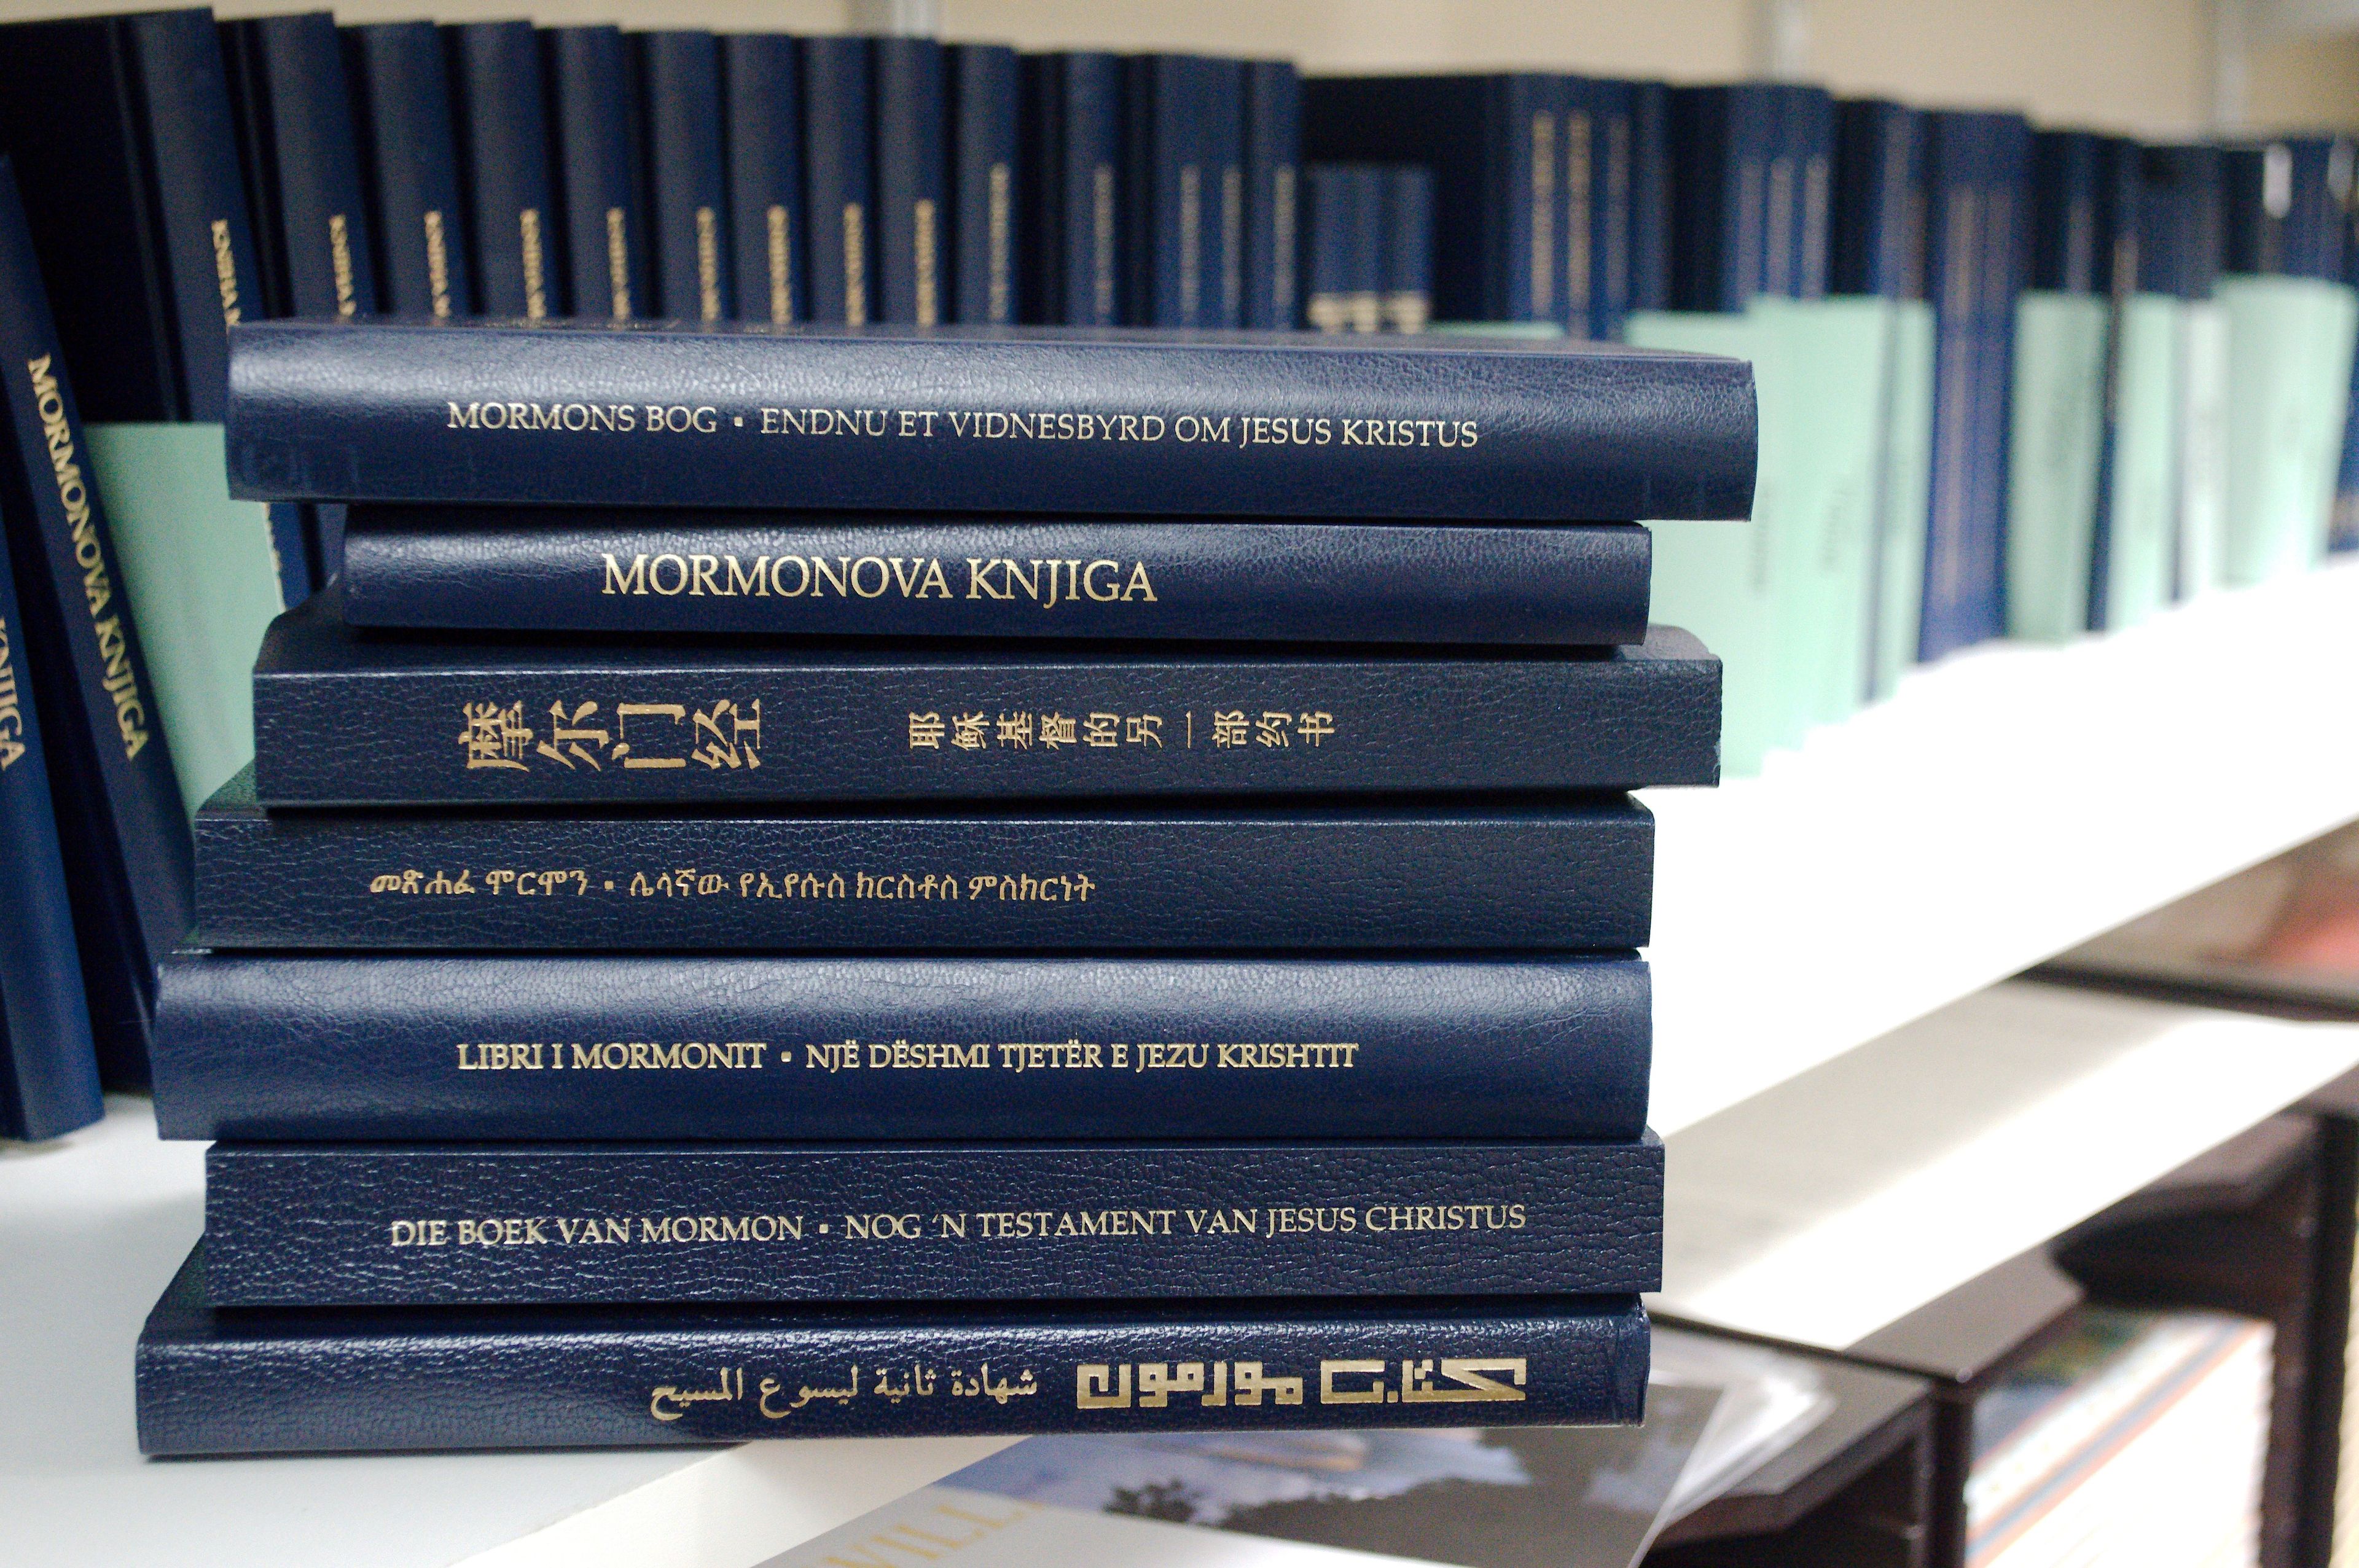 Copies of the Book of Mormon in several languages.